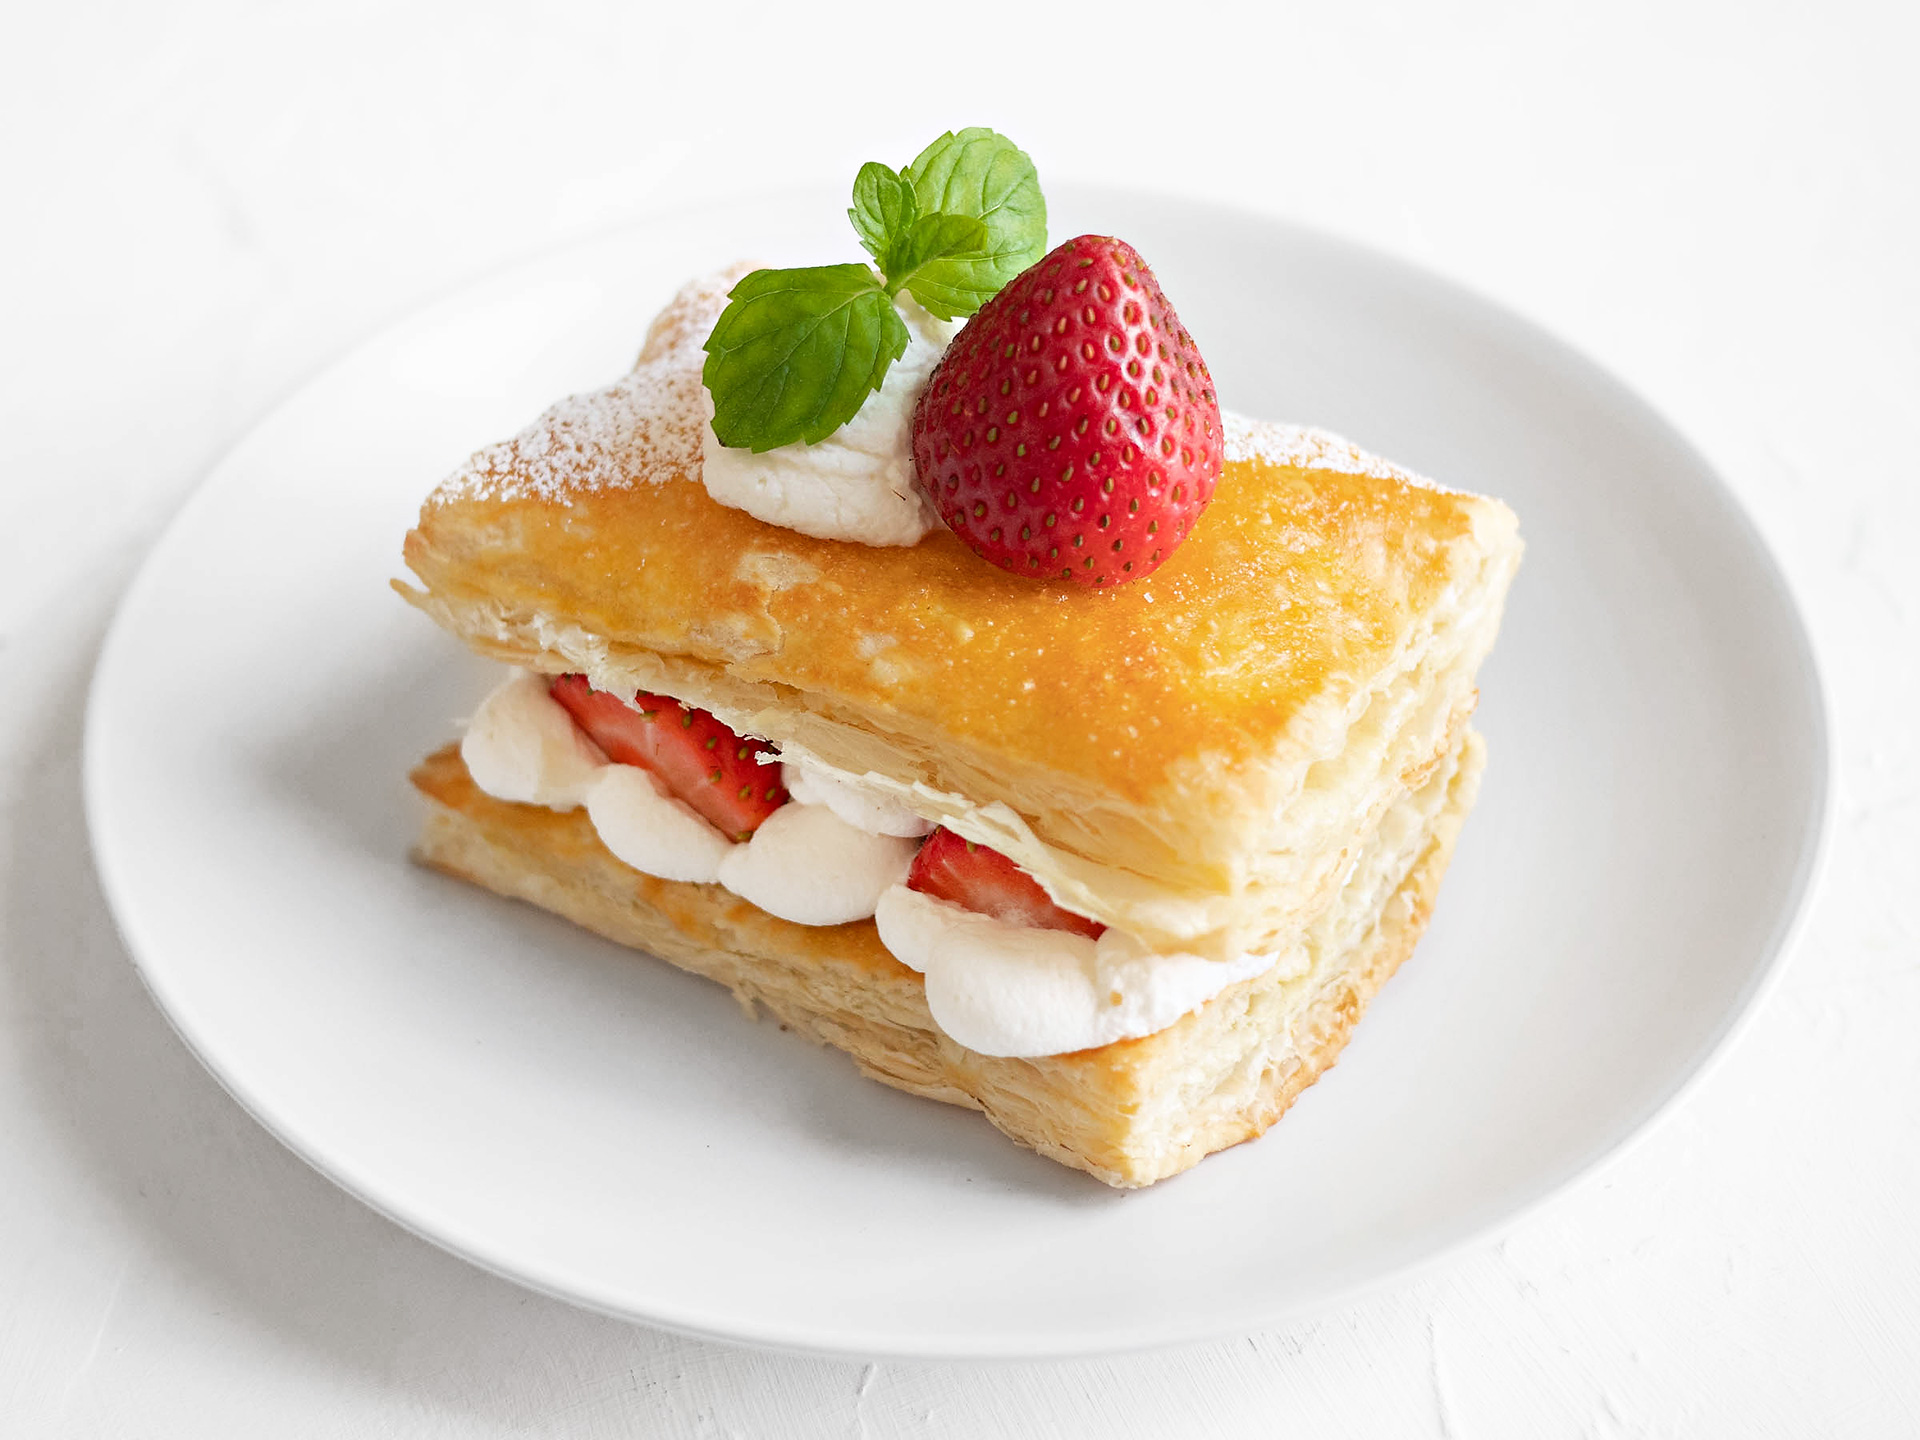 How to make mille-feuille